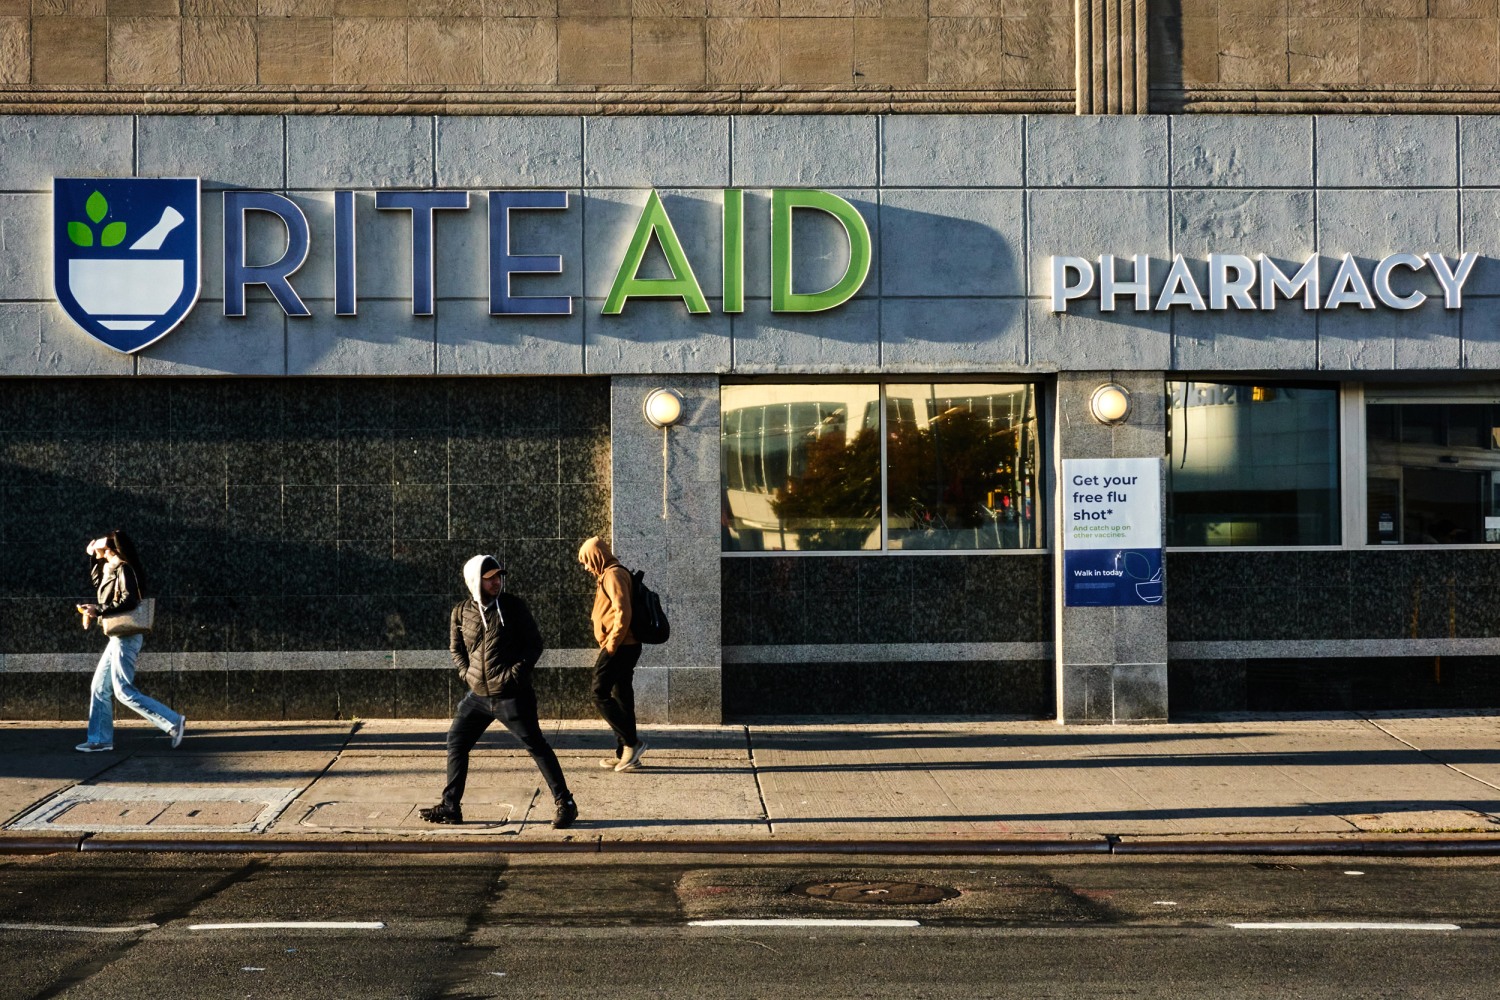 Walmart Vs. Rite Aid: Which Is Better for Drugstore Purchases?